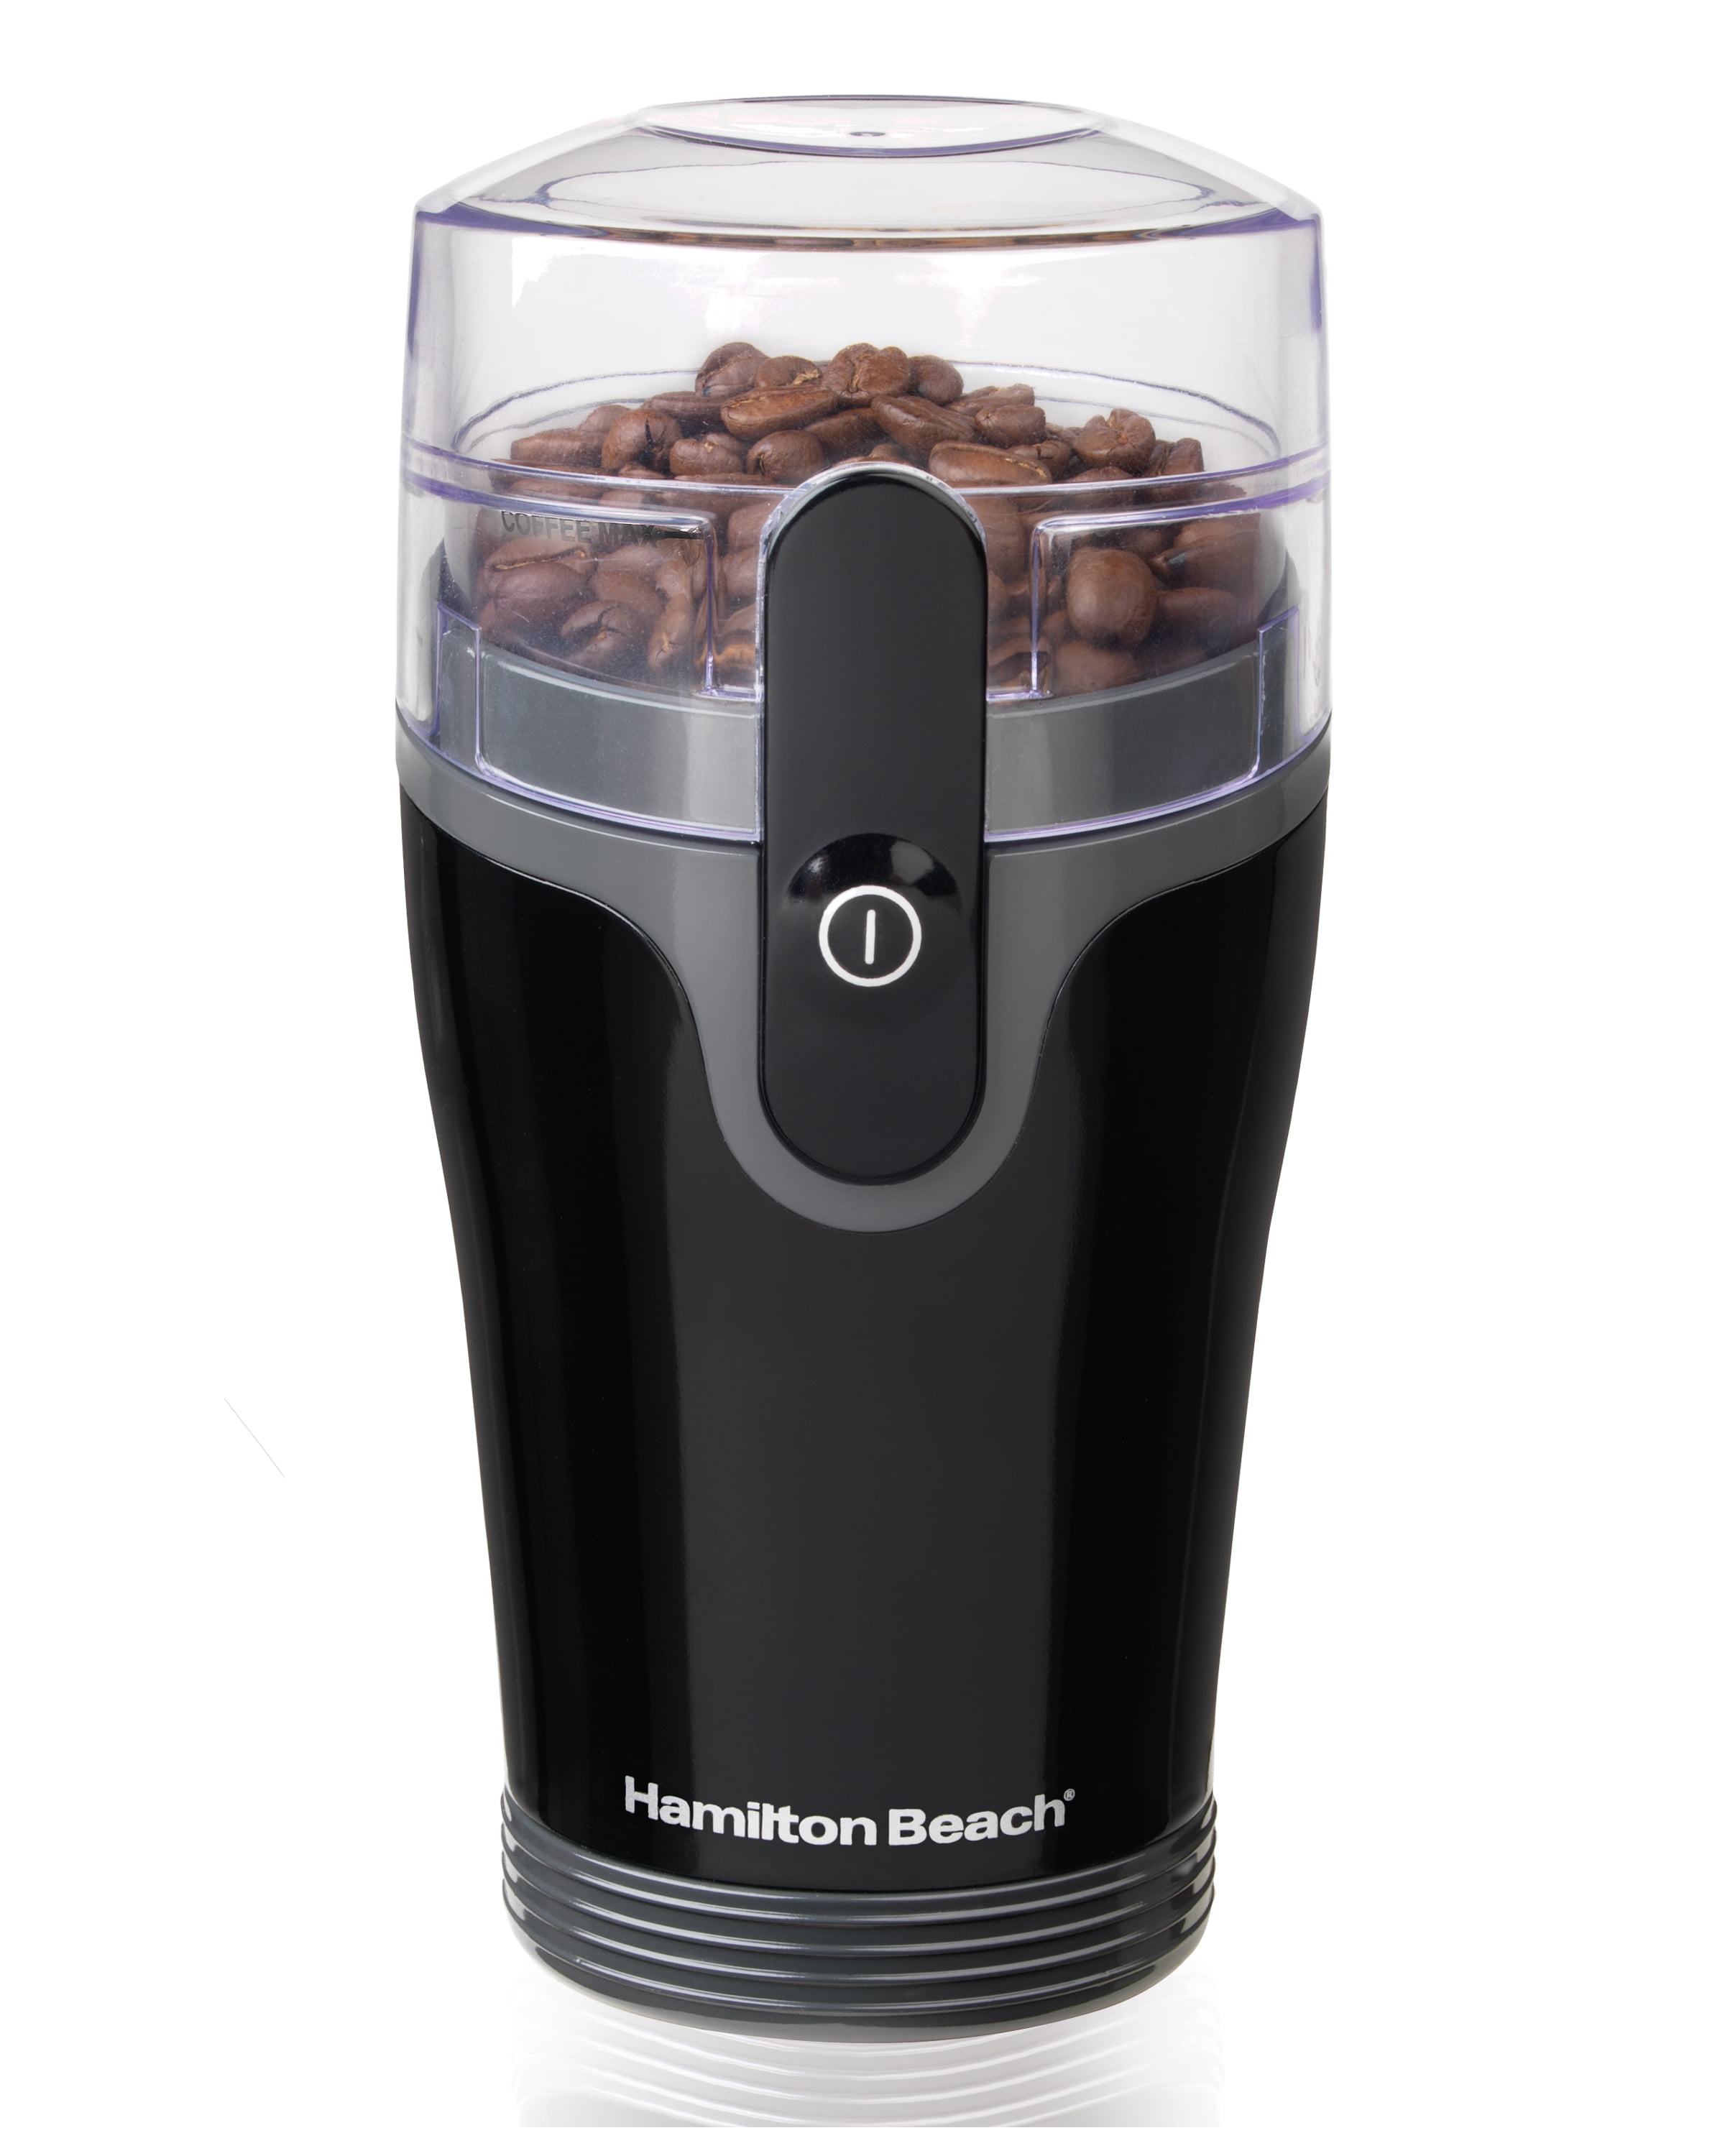 Hamilton Beach 46310 coffee maker 12-cup Glass Carafe replacement